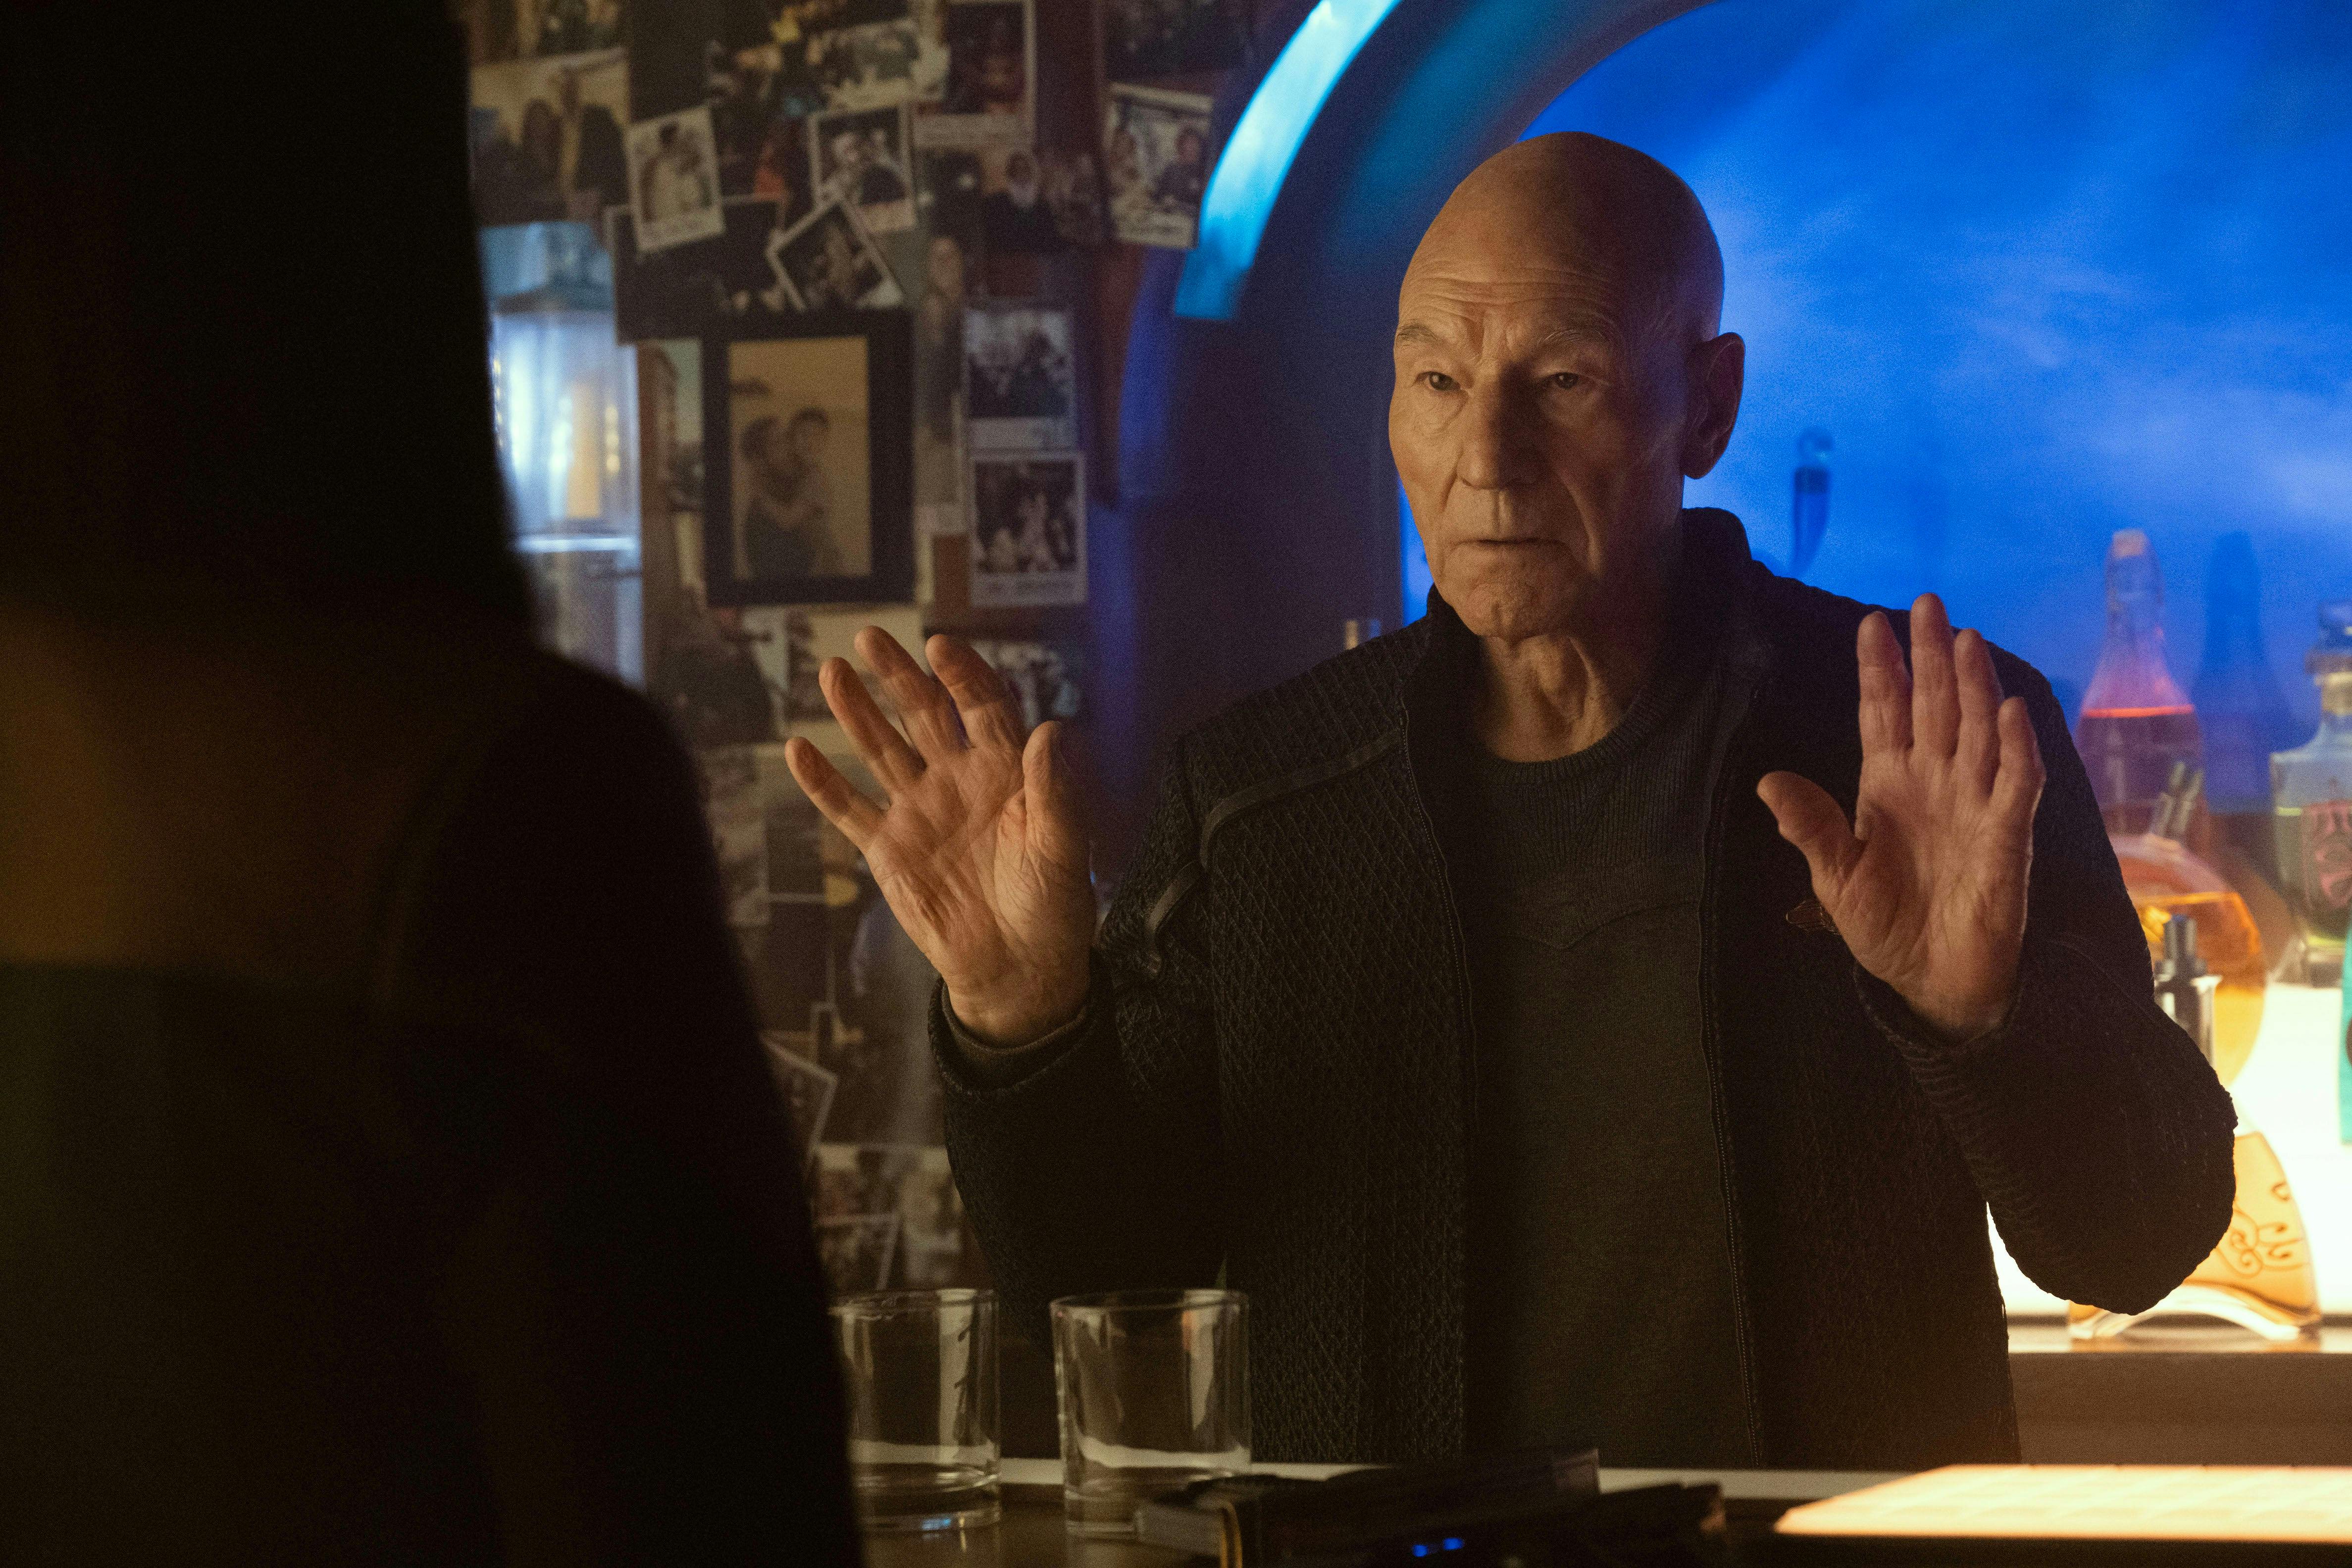 In the 10 Forward holoprogram, Picard stands with his hands up in defense in front of a figure